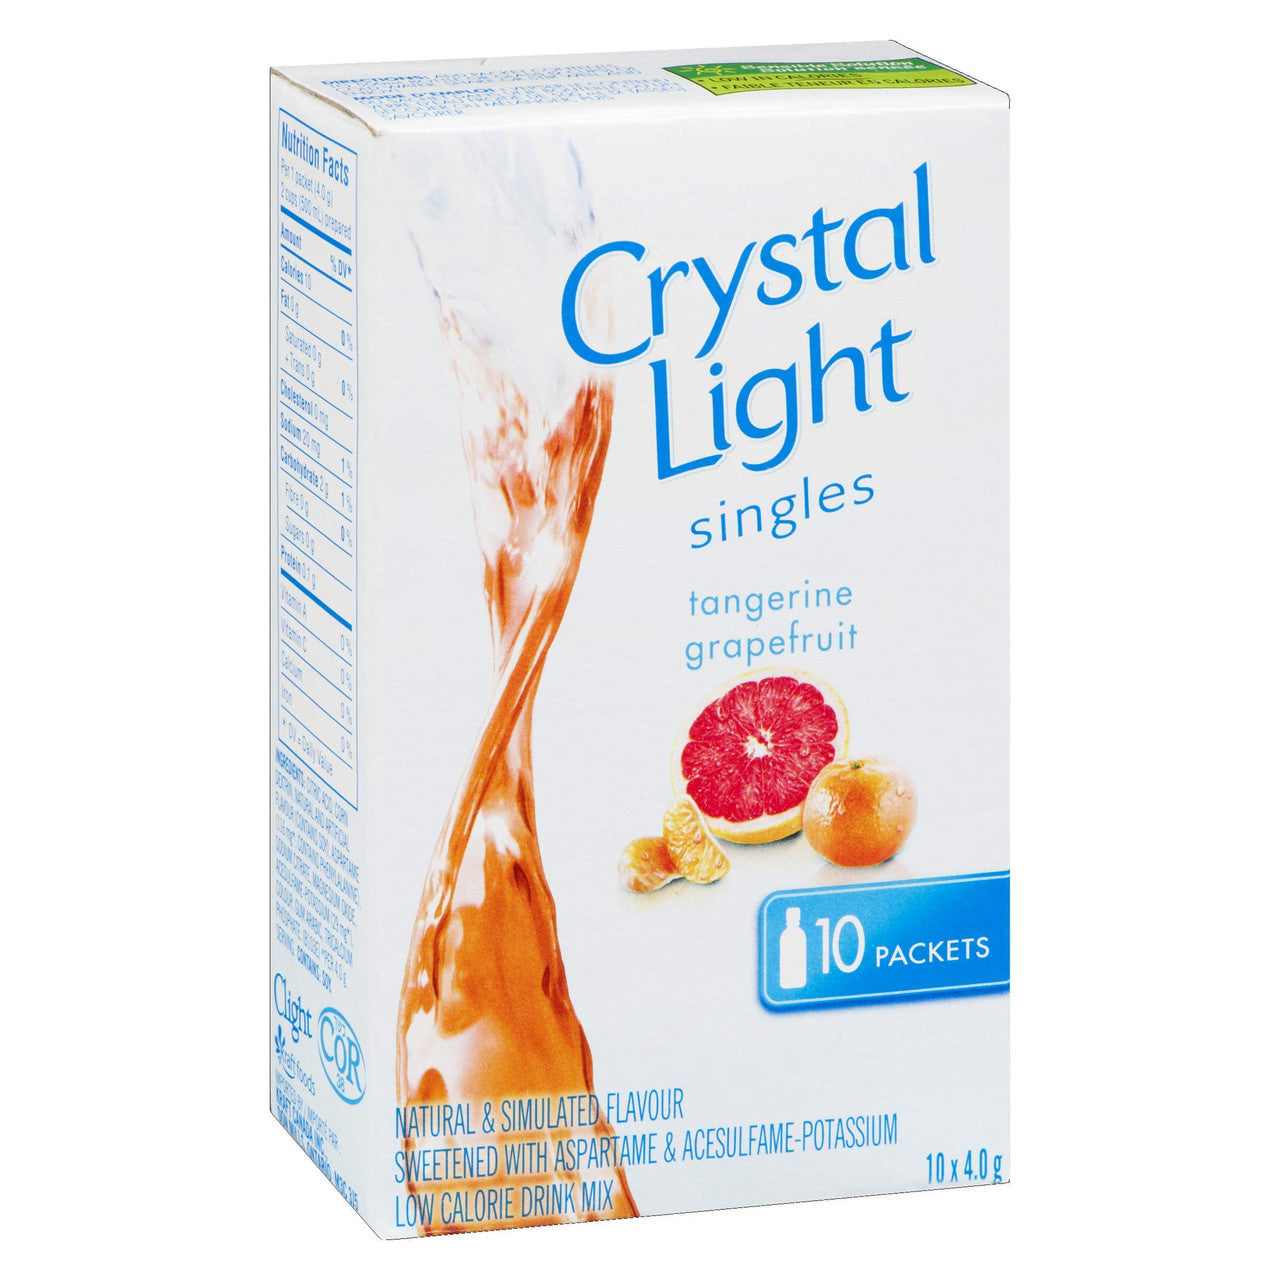 Crystal Light Singles, Tangerine Grapefruit, 120 Packets (12 Boxes of 10 Packets) {Imported from Canada}